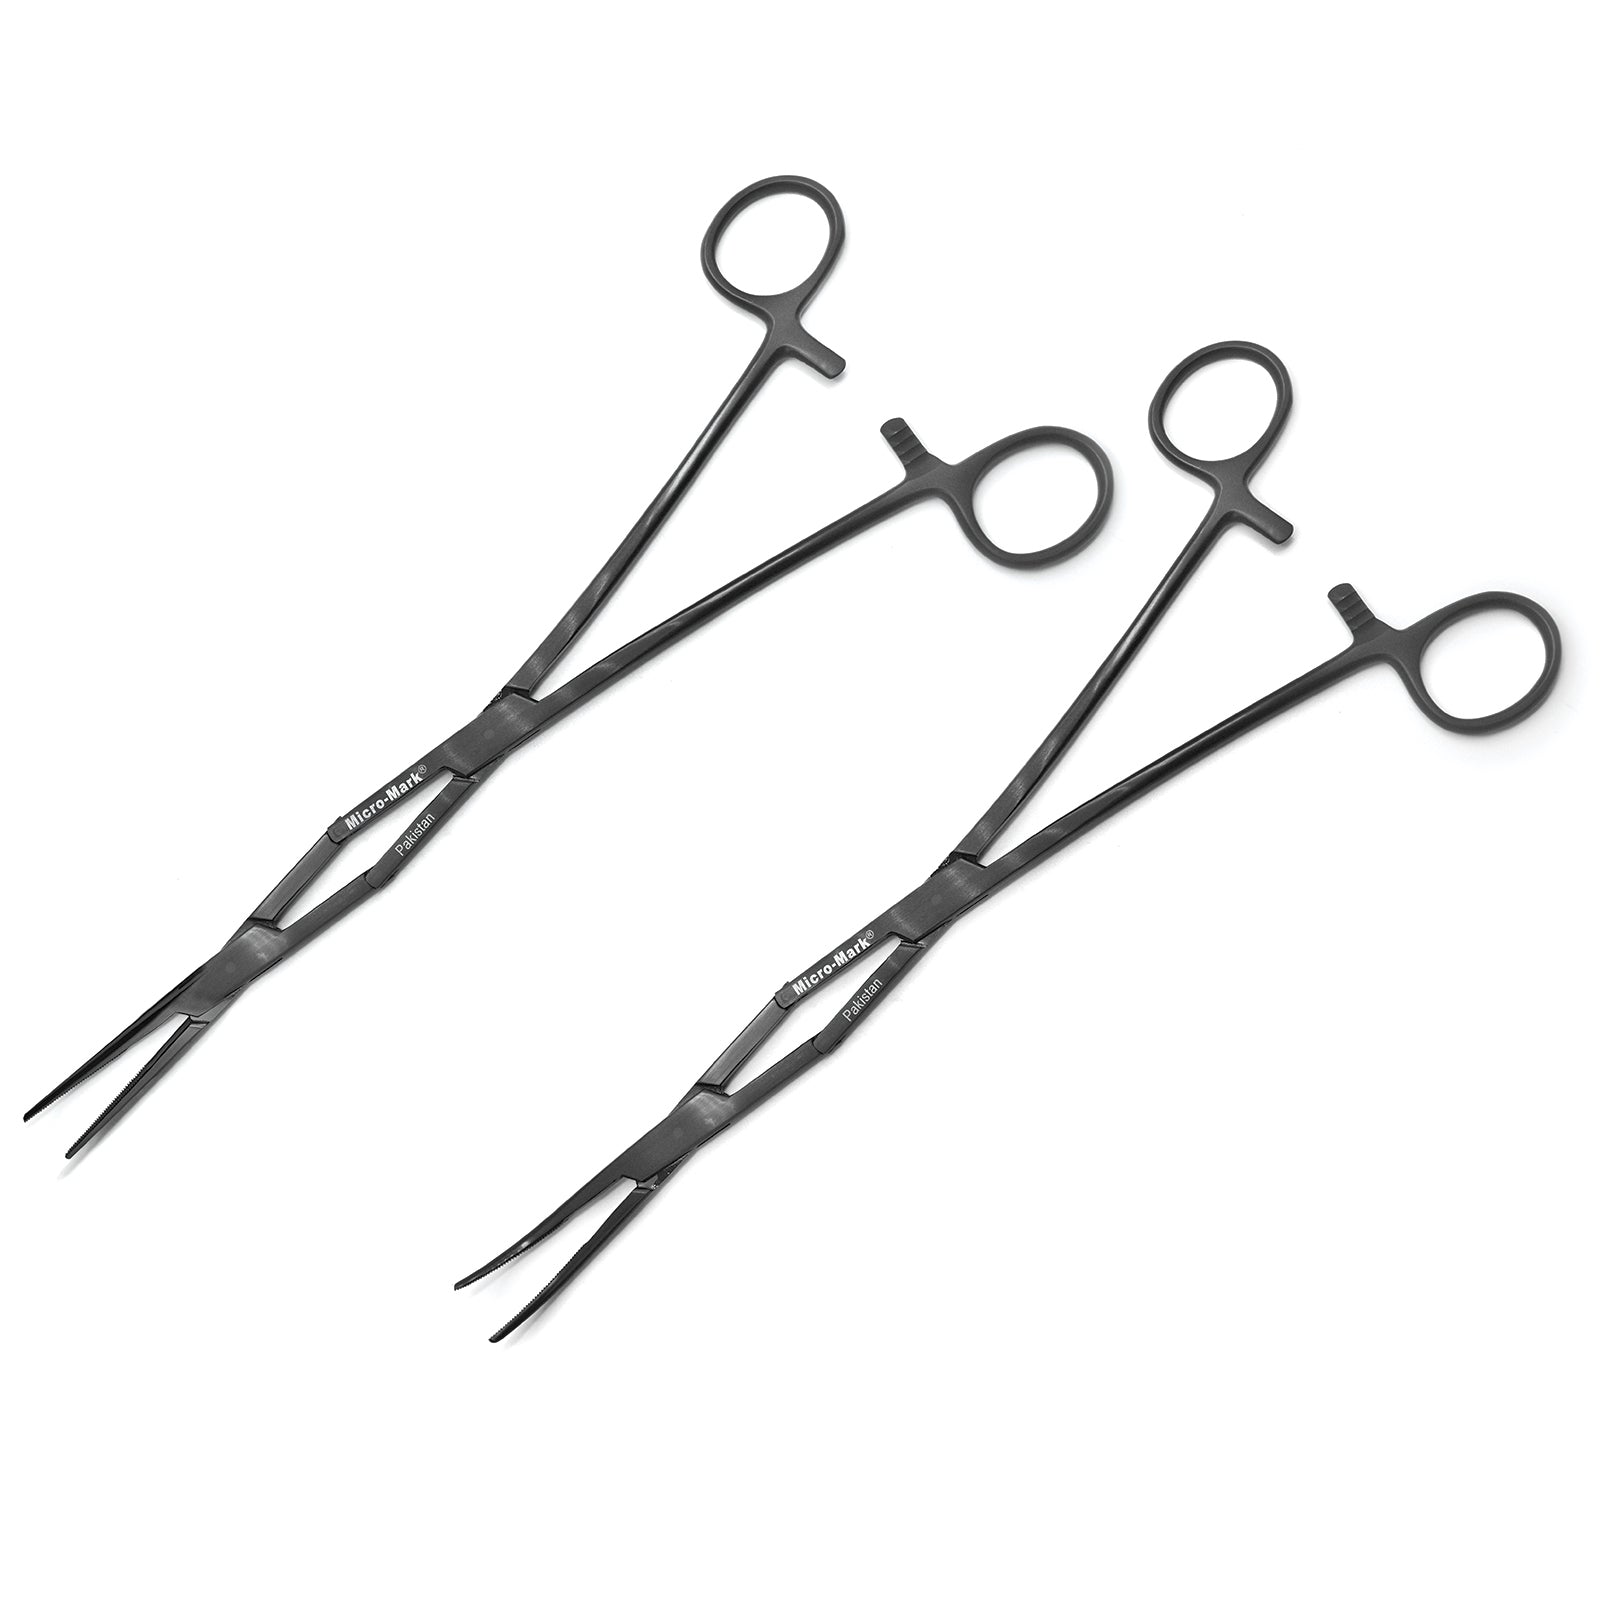 Double - Hinged Extended - Reach Hemostat Set (1 Each Straight Tip and 30 - Degree Curved Tip)